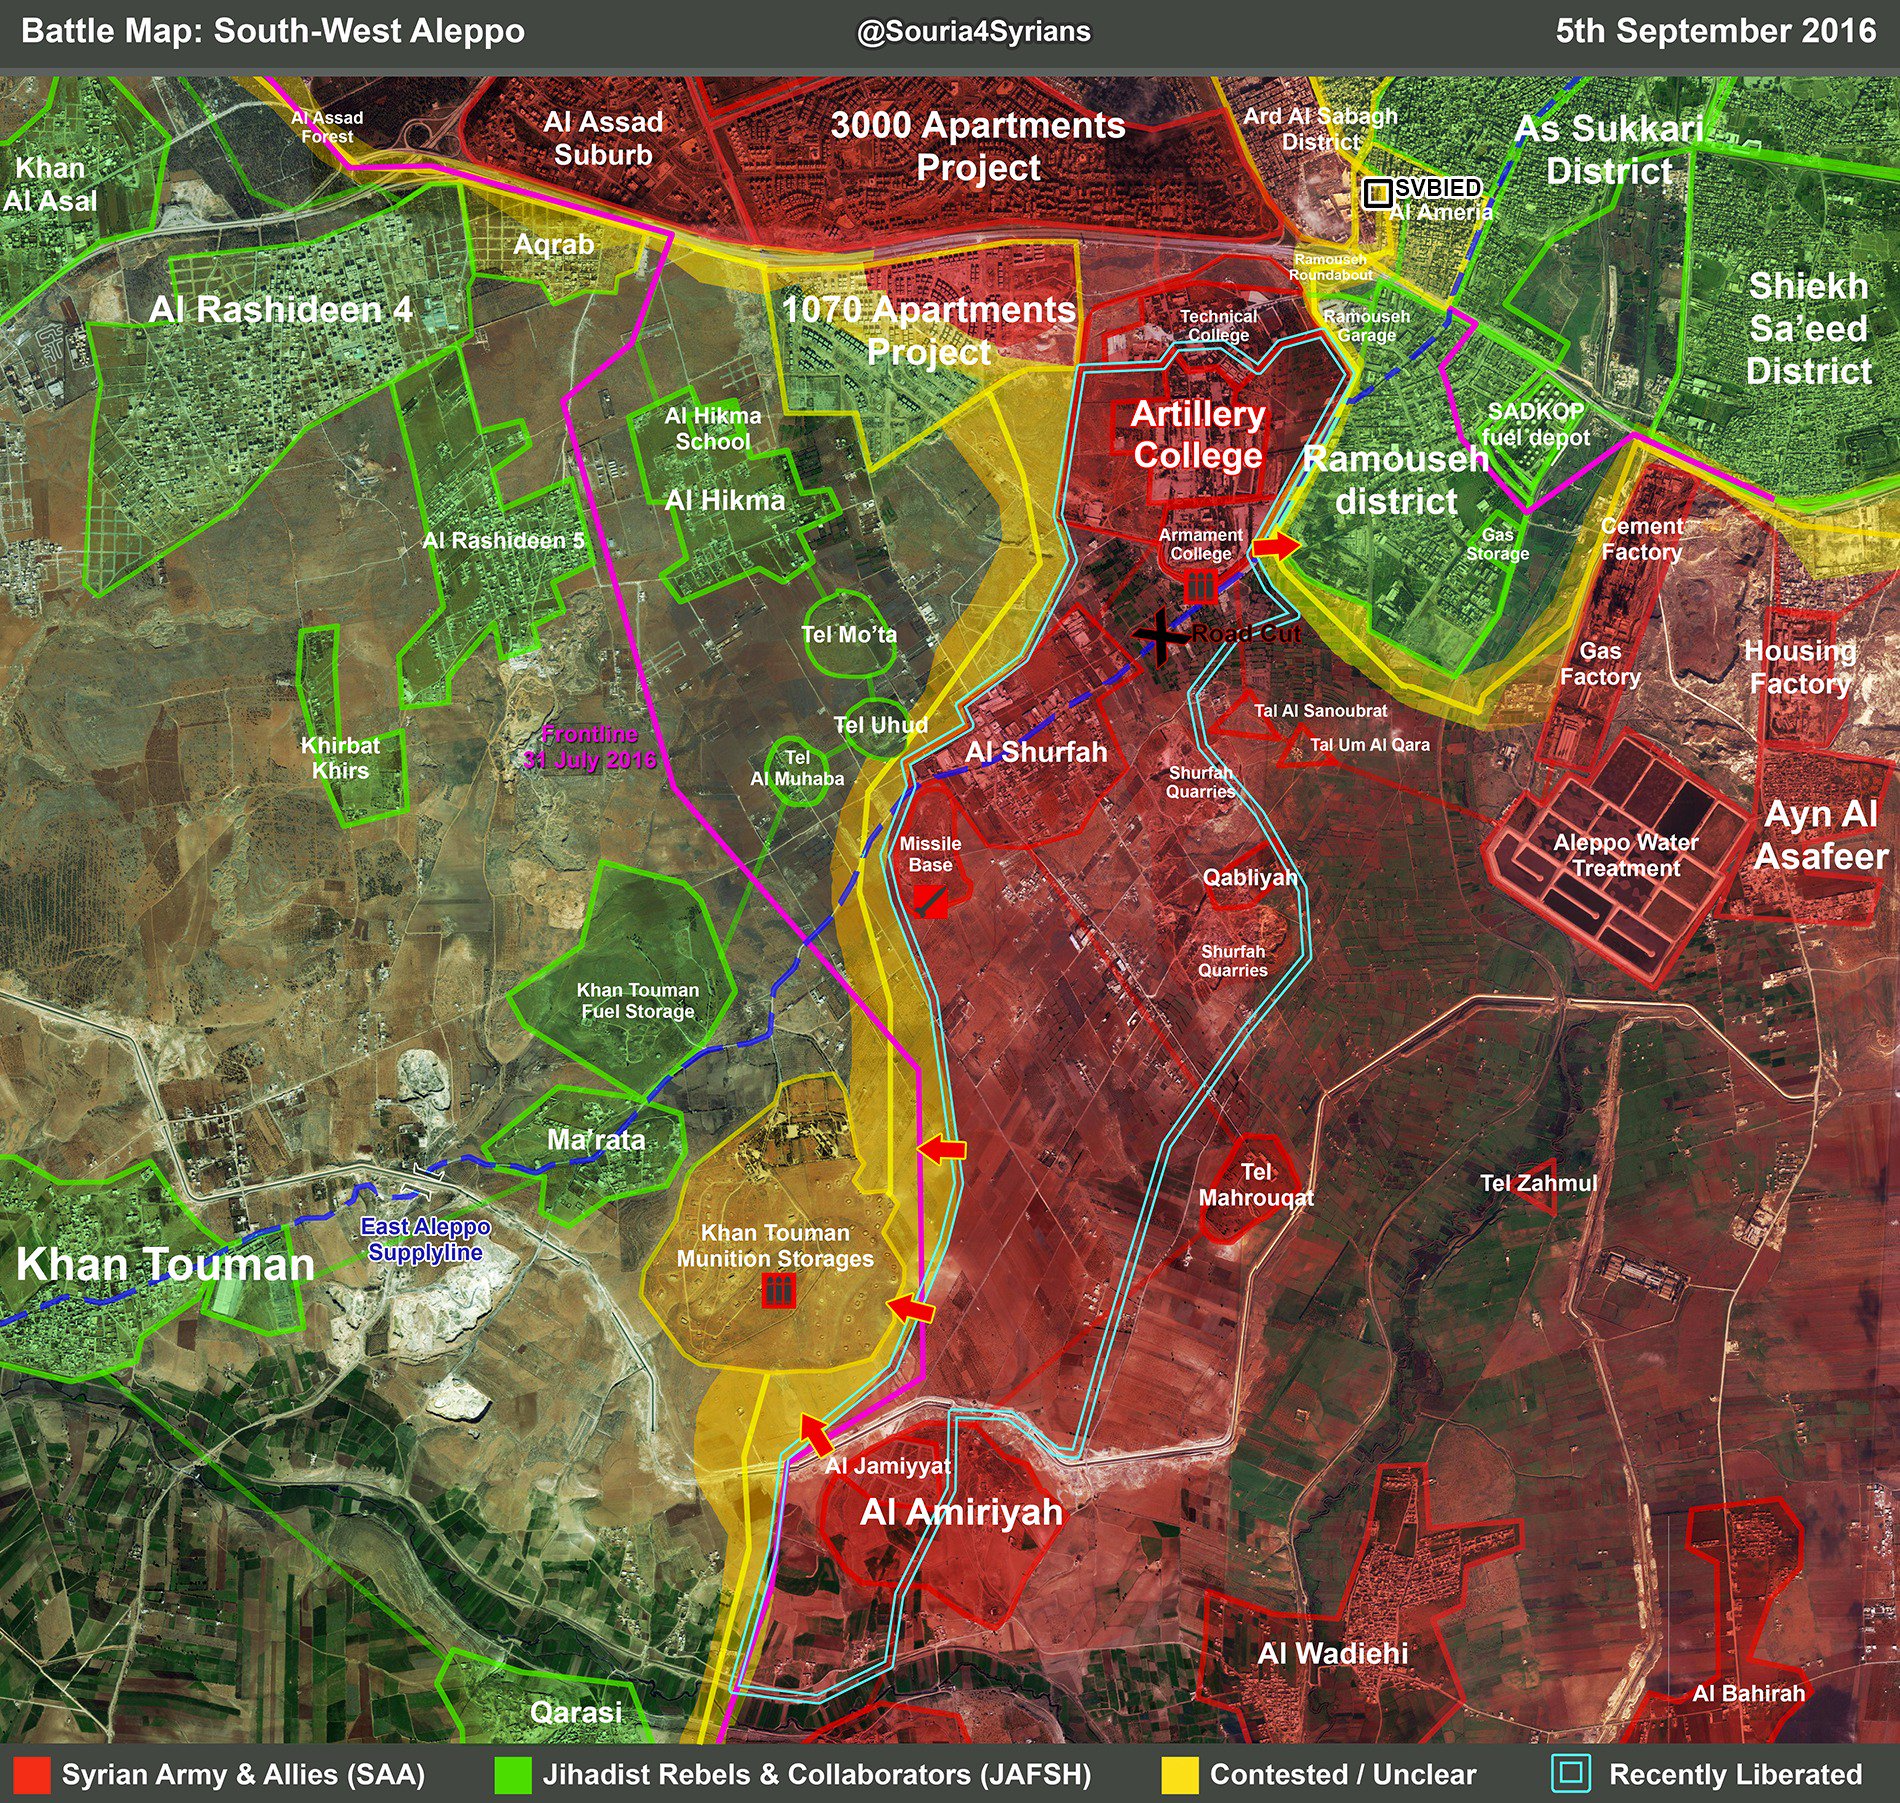 Overview of Military Situation in Syria on September 6